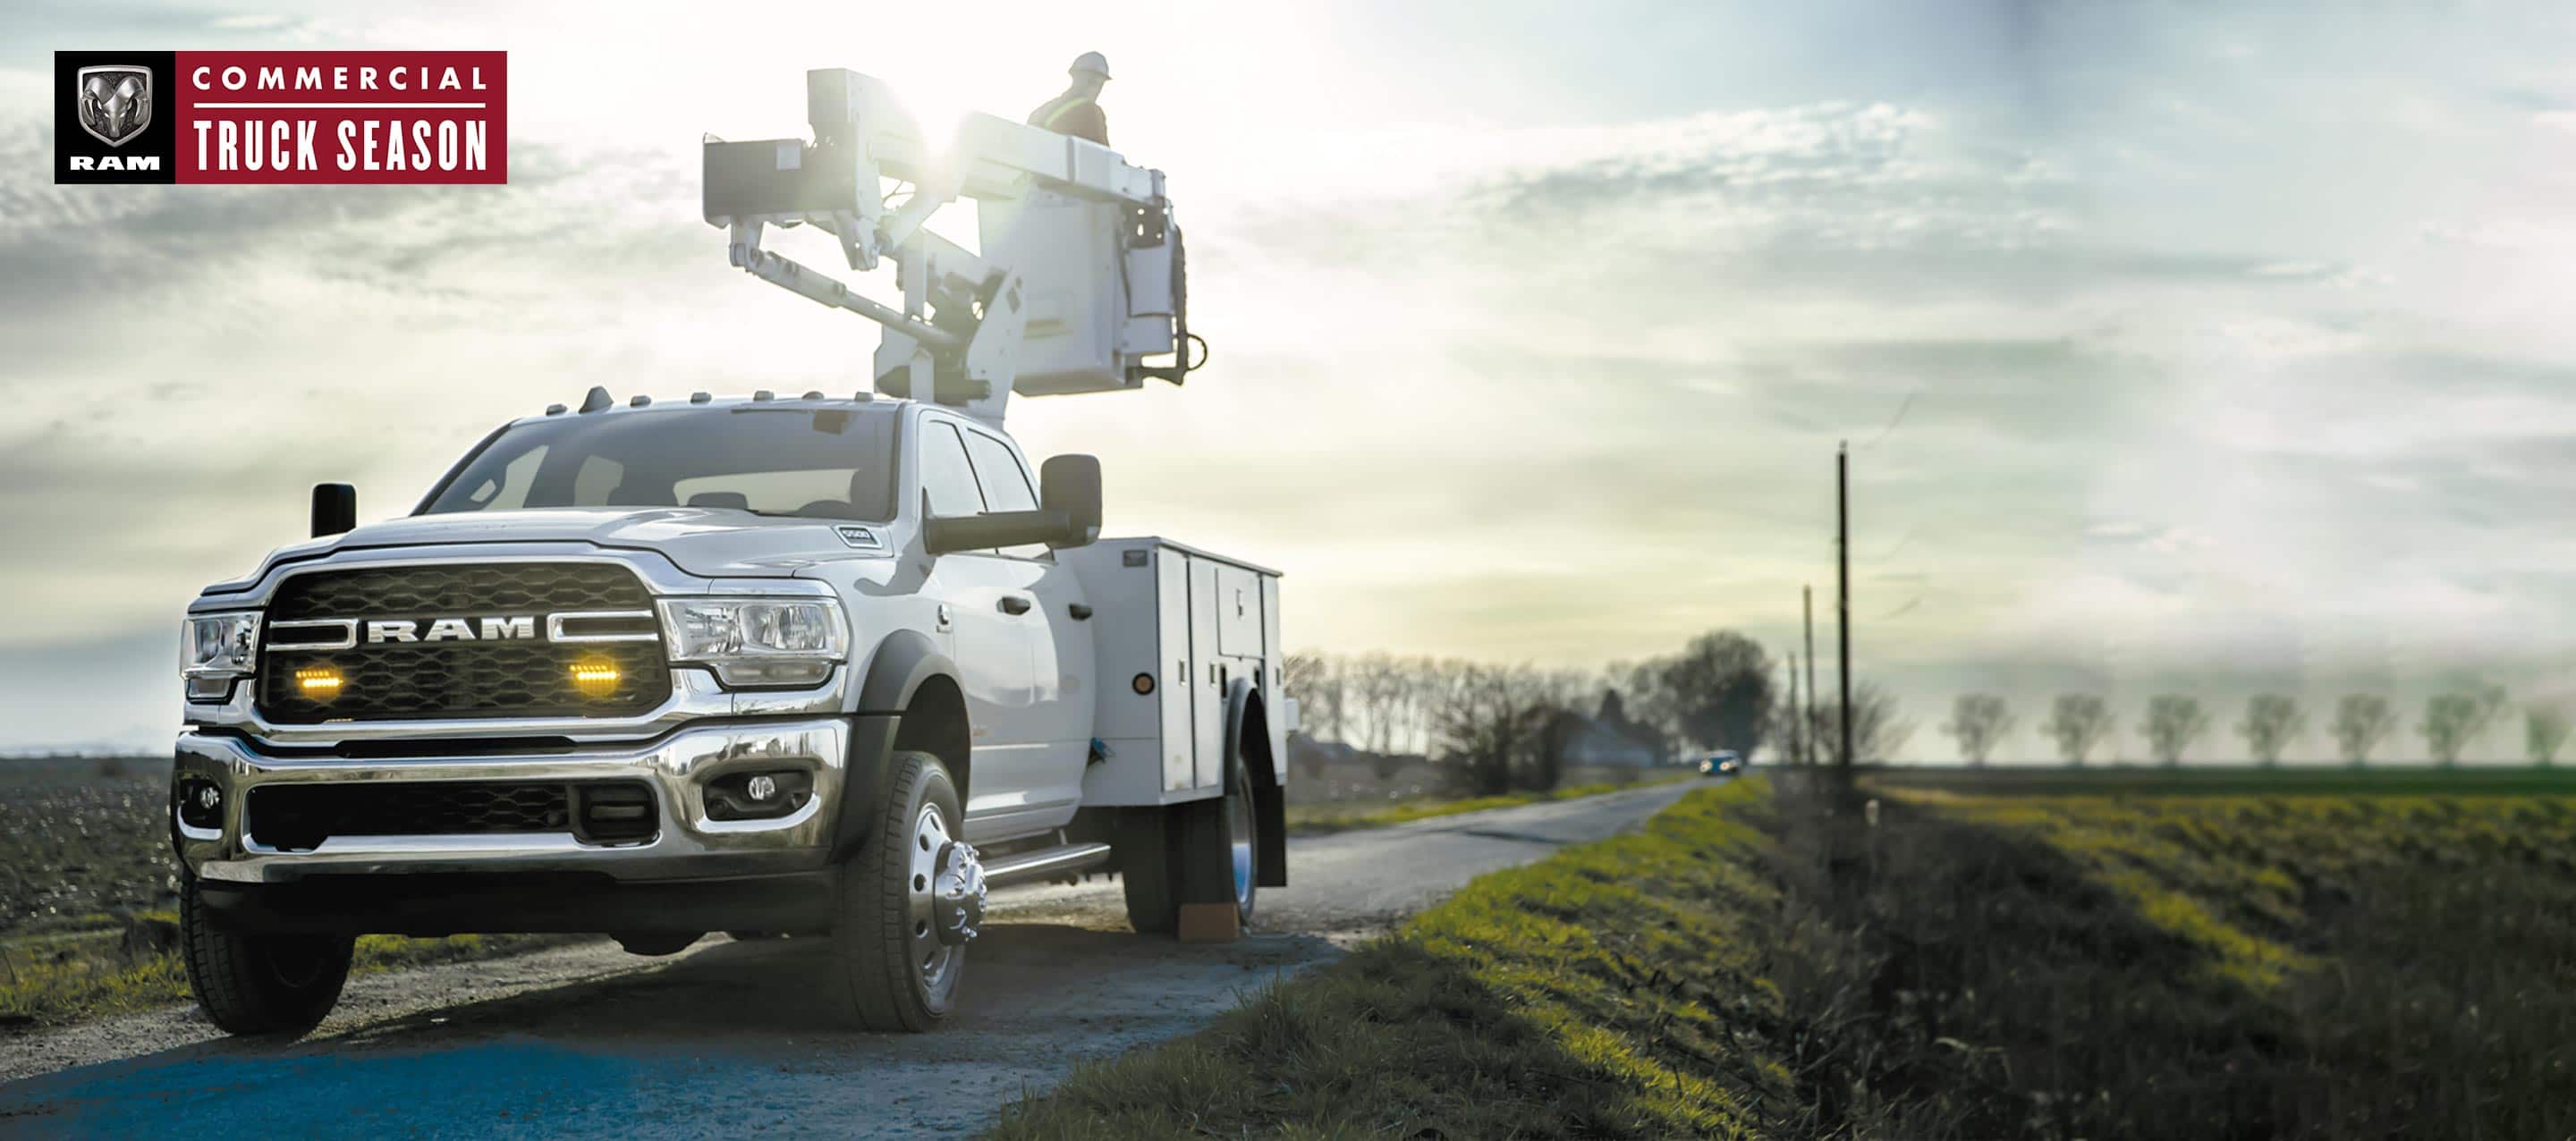 A white 2022 Ram 5500 Tradesman Chassis Cab 4x4 Crew Cab with mechanical upfit, parked on a single lane road, with a technician standing in the cherry picker bucket. Ram Commercial Truck Season.